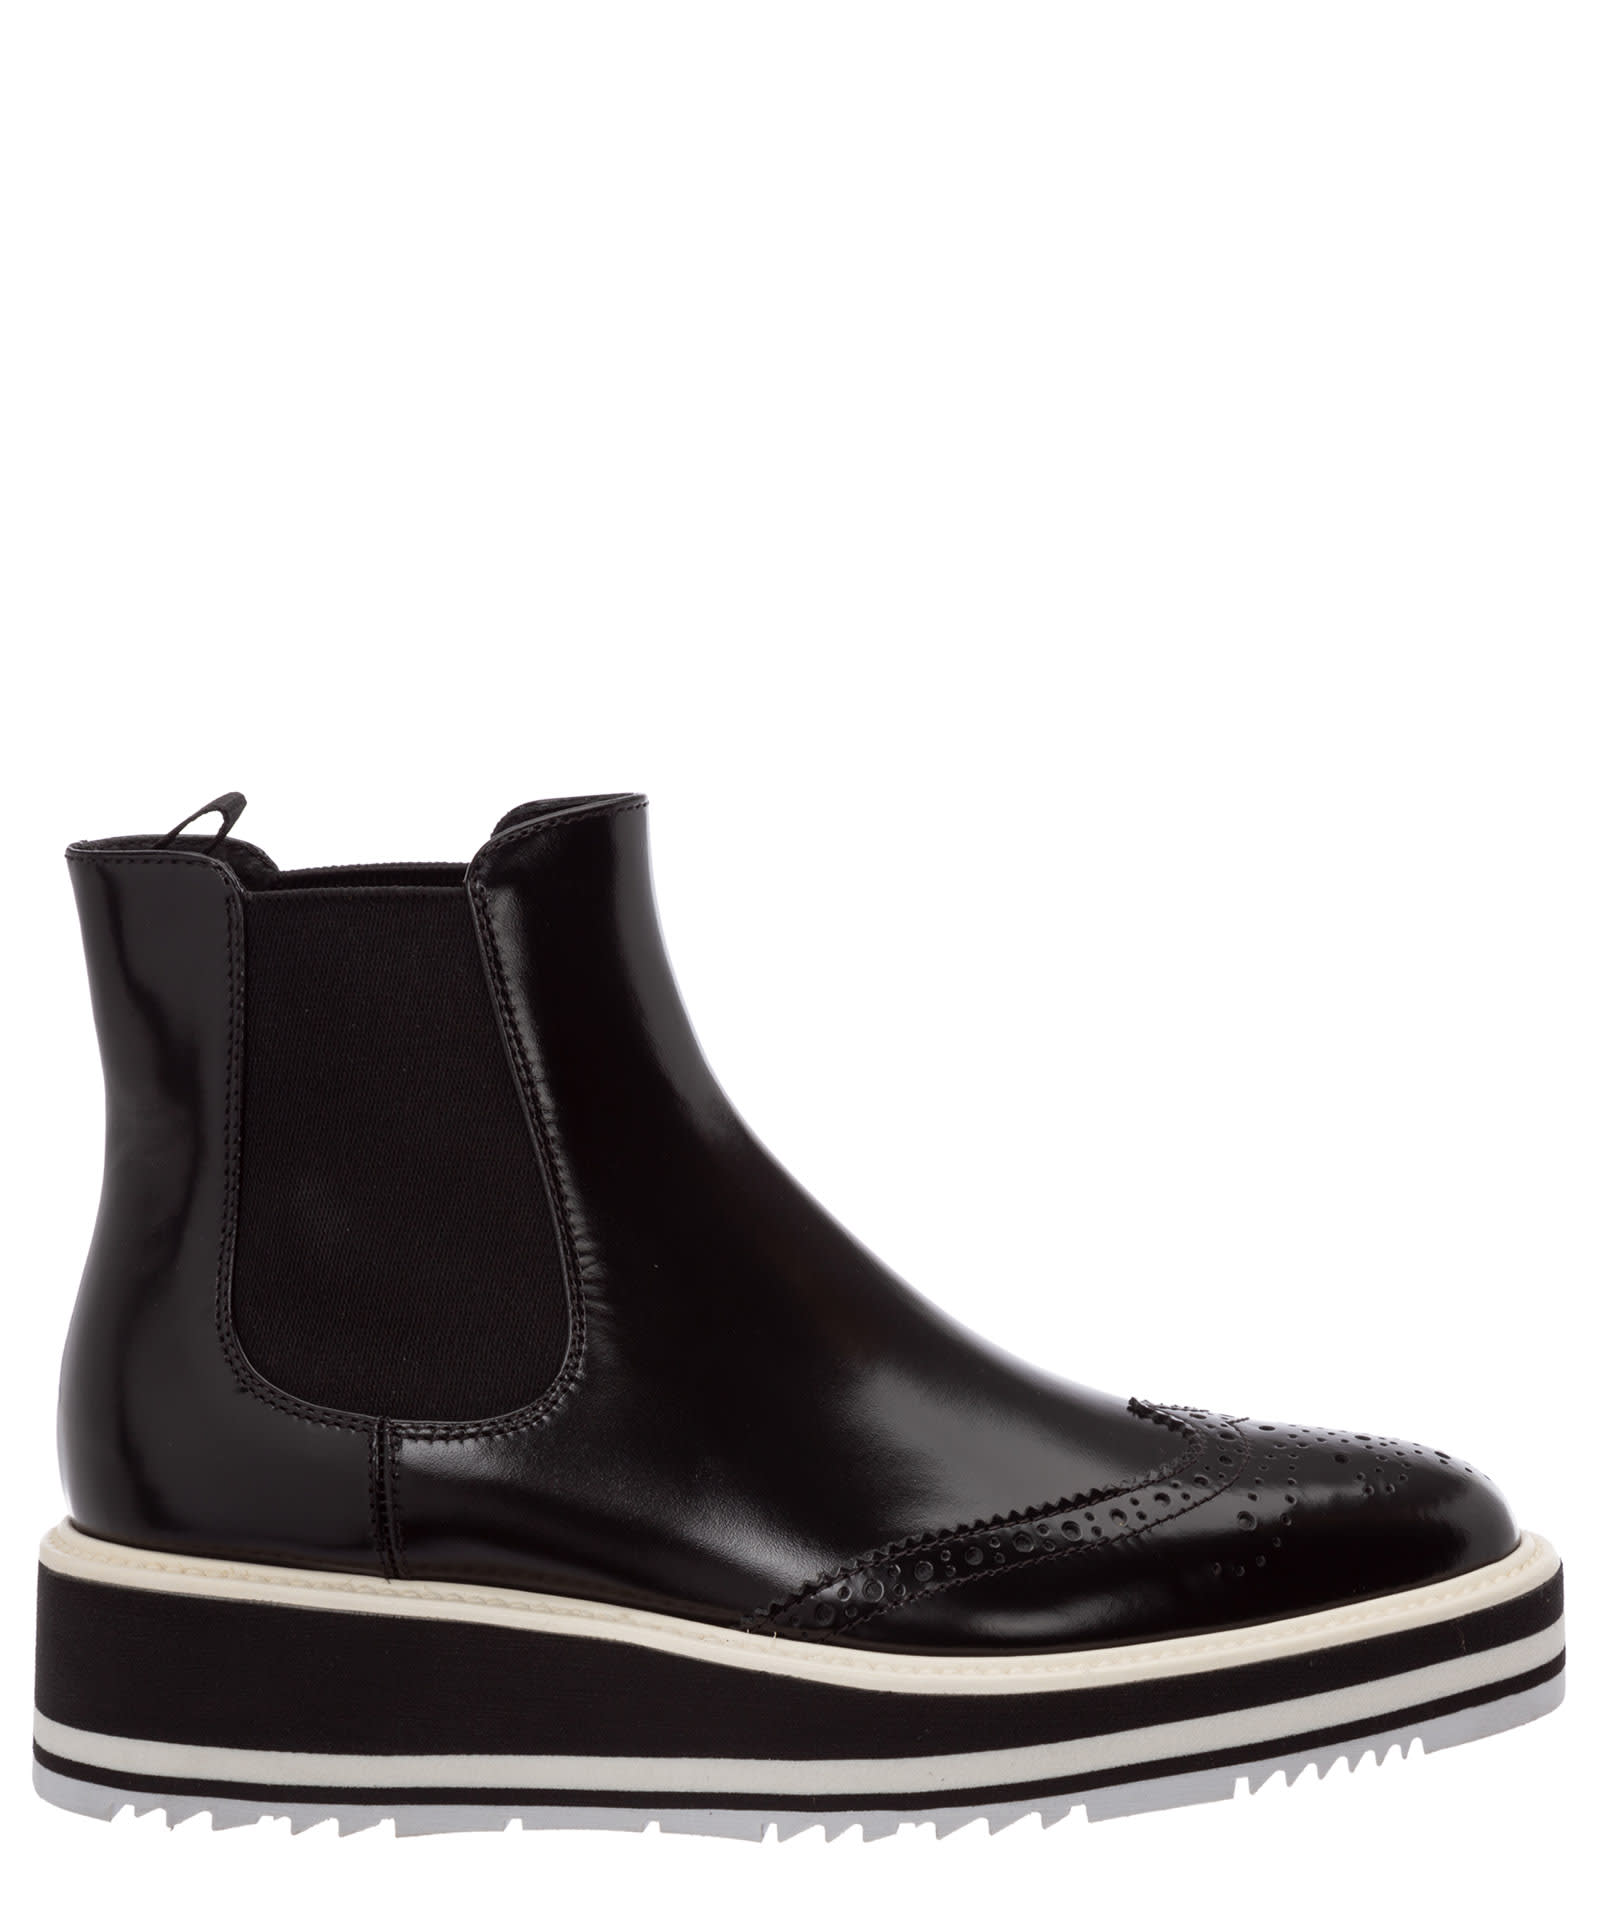 Prada Leather Ankle Boots